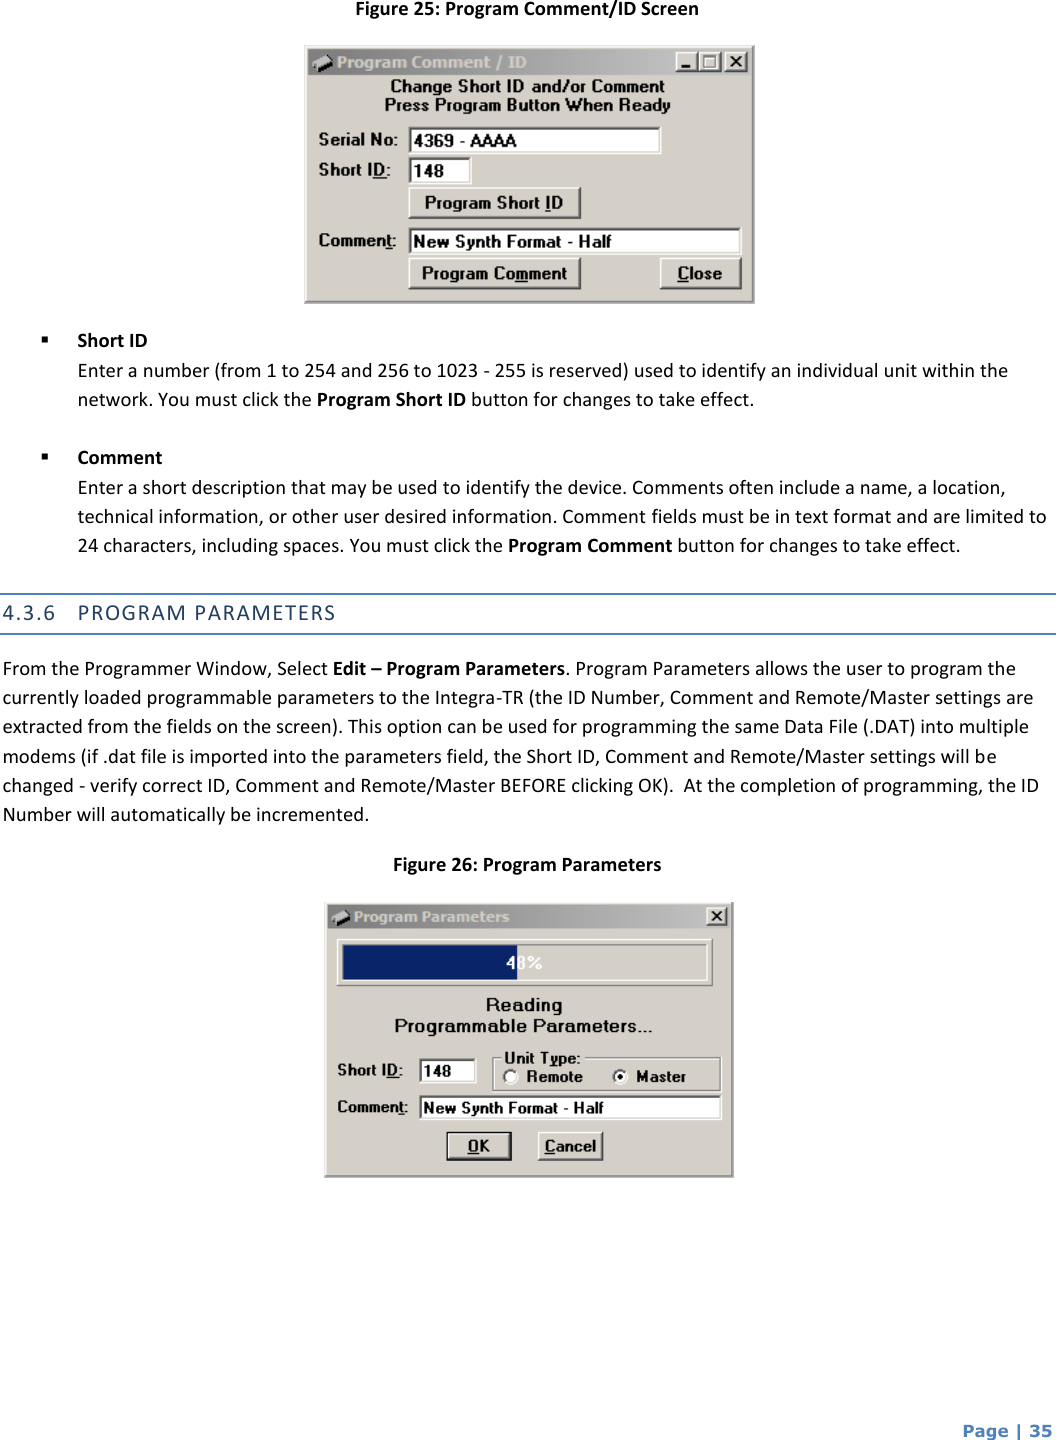  Page | 35 Figure 25: Program Comment/ID Screen   Short ID Enter a number (from 1 to 254 and 256 to 1023 - 255 is reserved) used to identify an individual unit within the network. You must click the Program Short ID button for changes to take effect.    Comment Enter a short description that may be used to identify the device. Comments often include a name, a location, technical information, or other user desired information. Comment fields must be in text format and are limited to 24 characters, including spaces. You must click the Program Comment button for changes to take effect.  4.3.6 PROGRAM PARAMETERS From the Programmer Window, Select Edit – Program Parameters. Program Parameters allows the user to program the currently loaded programmable parameters to the Integra-TR (the ID Number, Comment and Remote/Master settings are extracted from the fields on the screen). This option can be used for programming the same Data File (.DAT) into multiple modems (if .dat file is imported into the parameters field, the Short ID, Comment and Remote/Master settings will be changed - verify correct ID, Comment and Remote/Master BEFORE clicking OK).  At the completion of programming, the ID Number will automatically be incremented. Figure 26: Program Parameters    